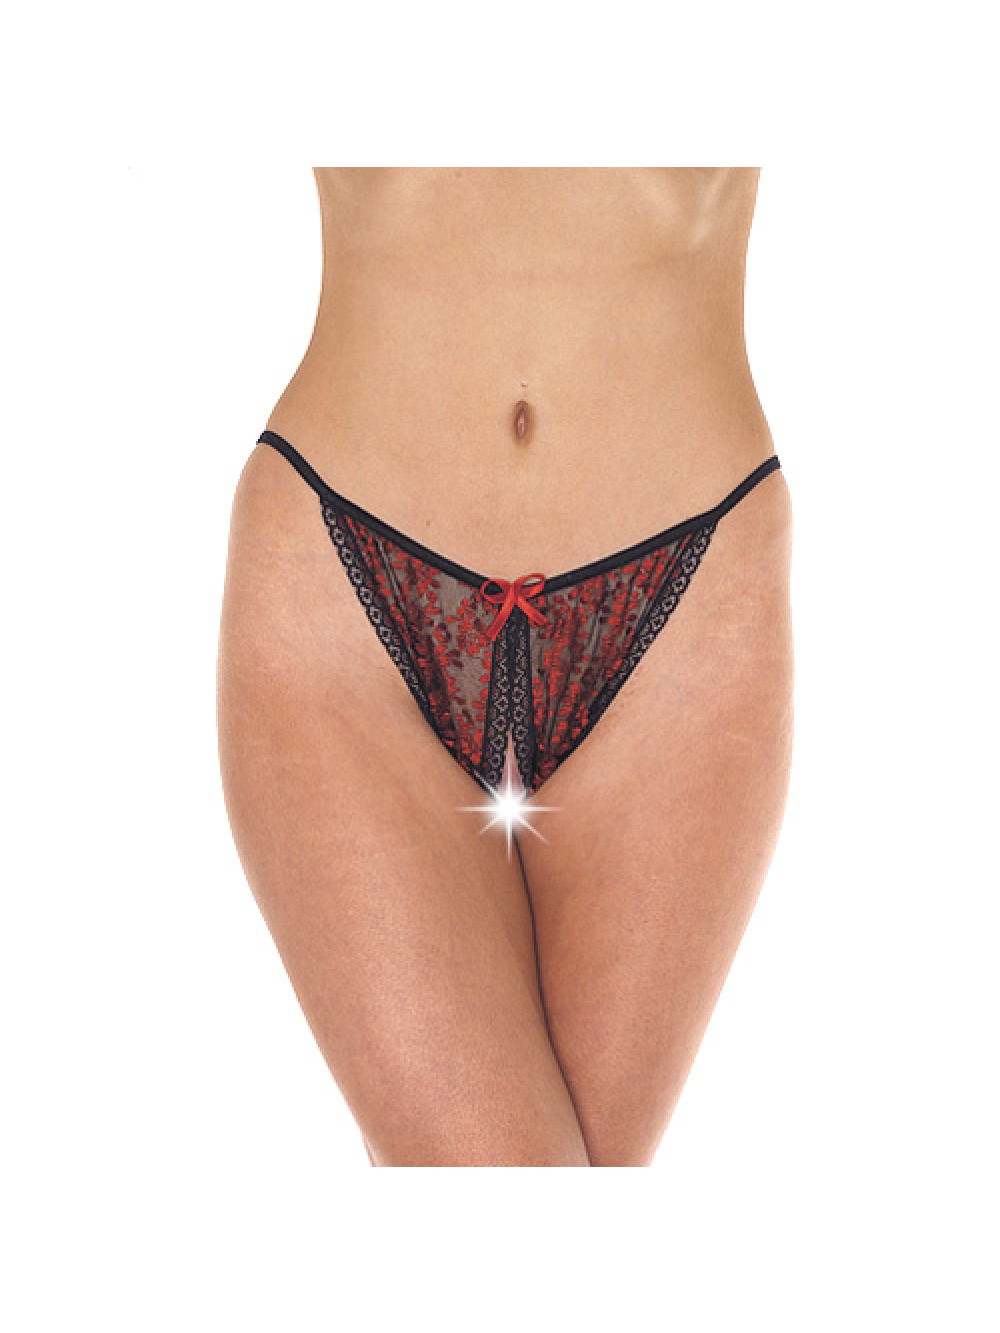 Red And Black Tanga Open Brief 8718924220986